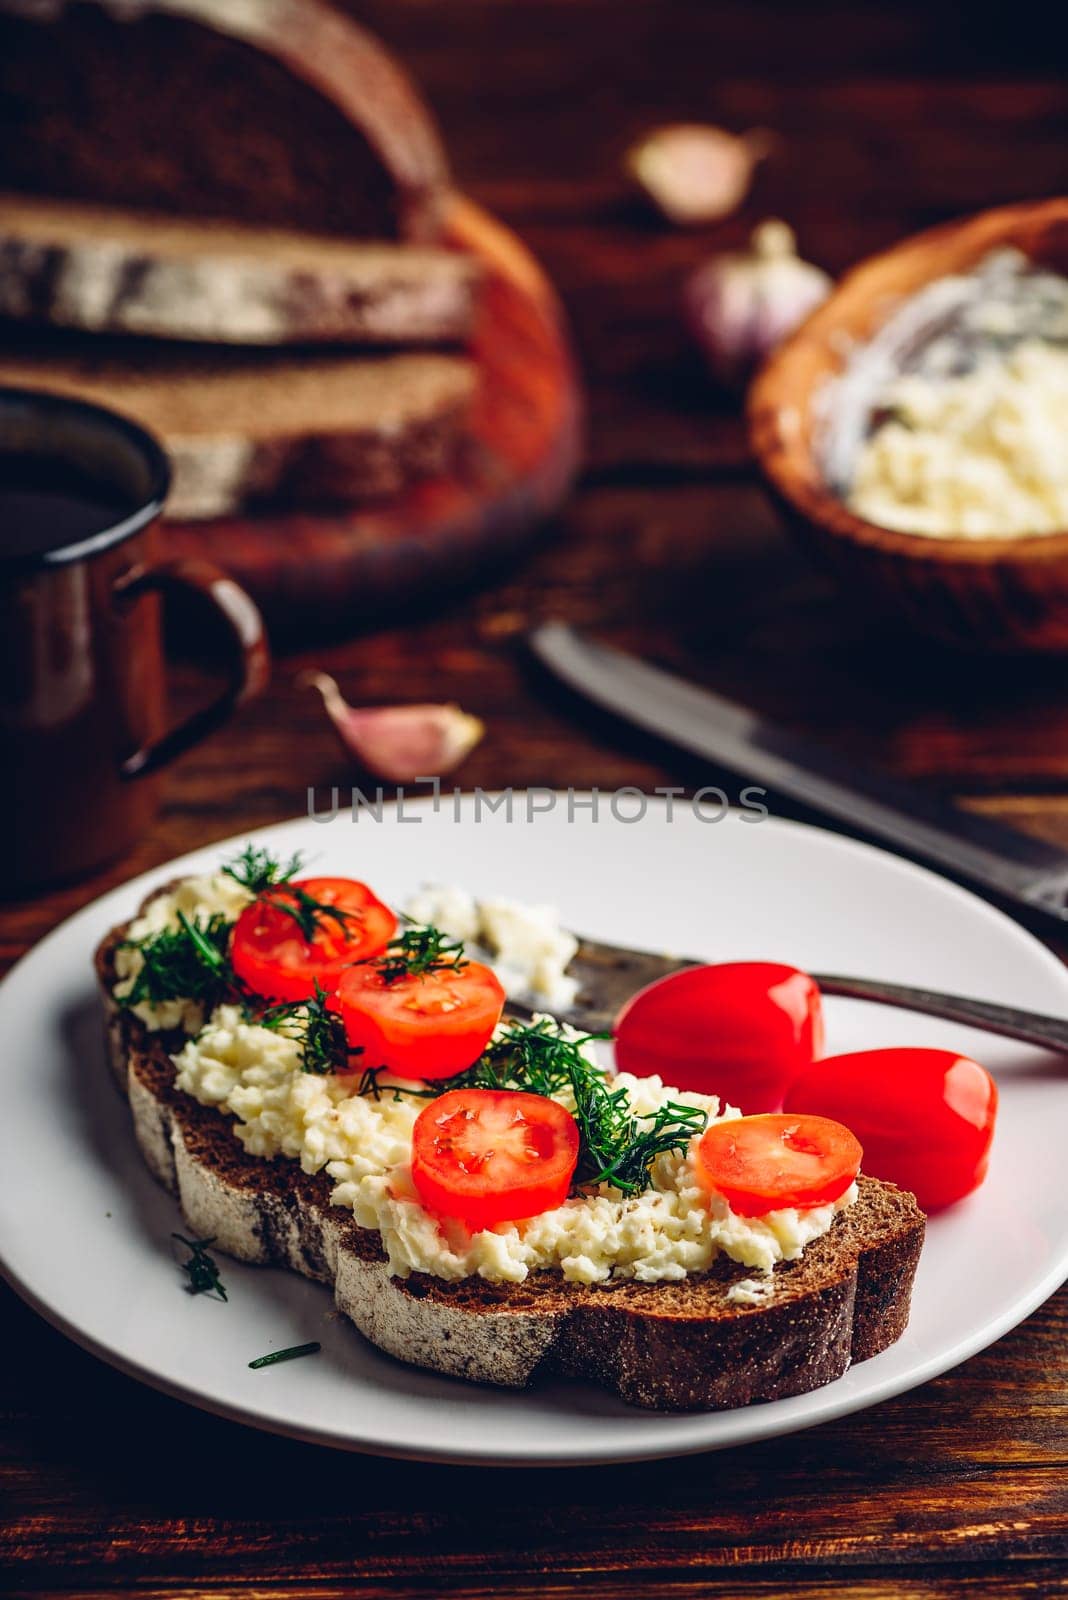 Rye bread toast with processed cheese, garlic and tomatoes by Seva_blsv